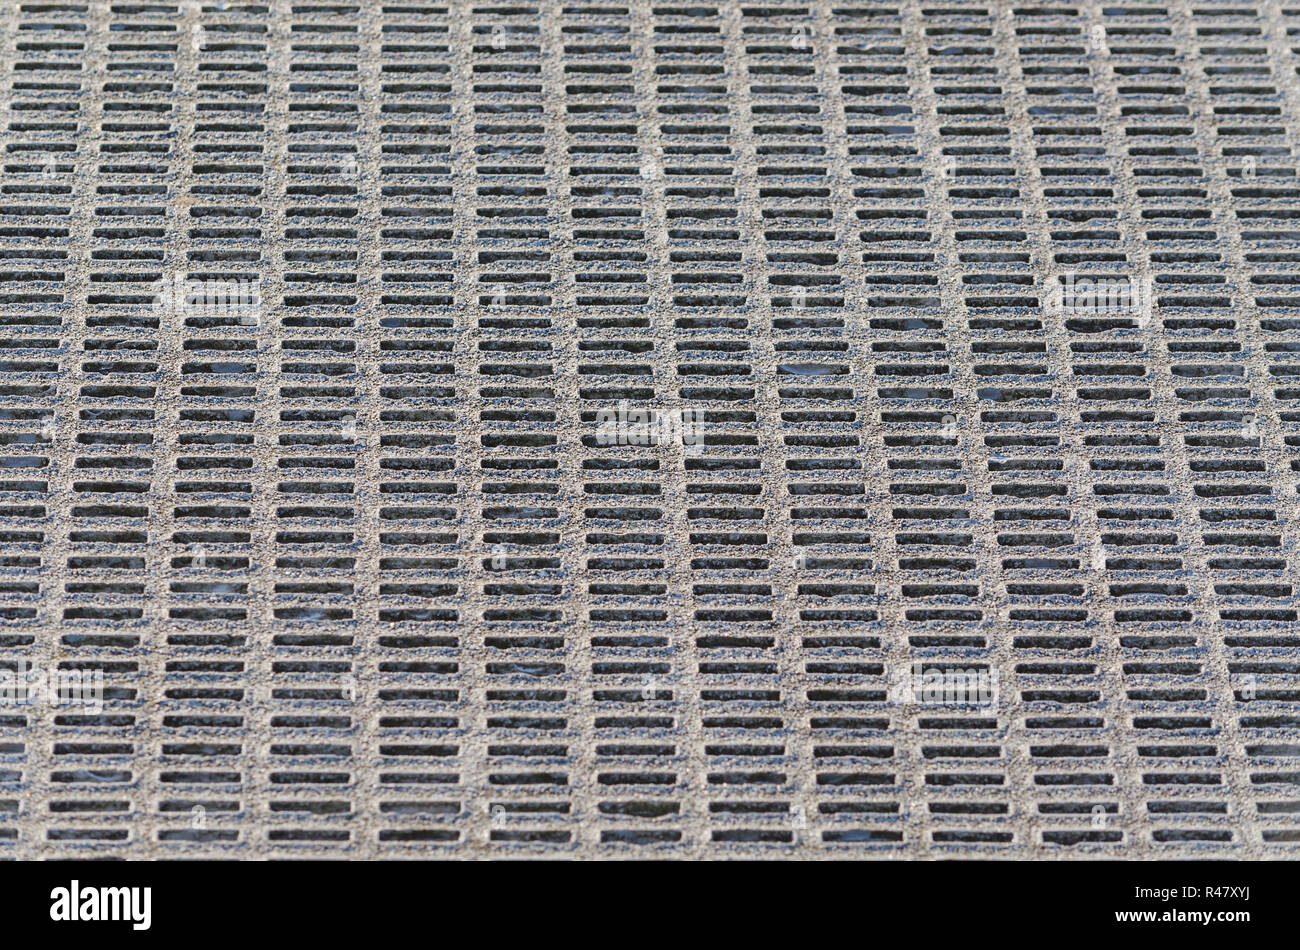 gray perforated metal grid background. Stock Photo